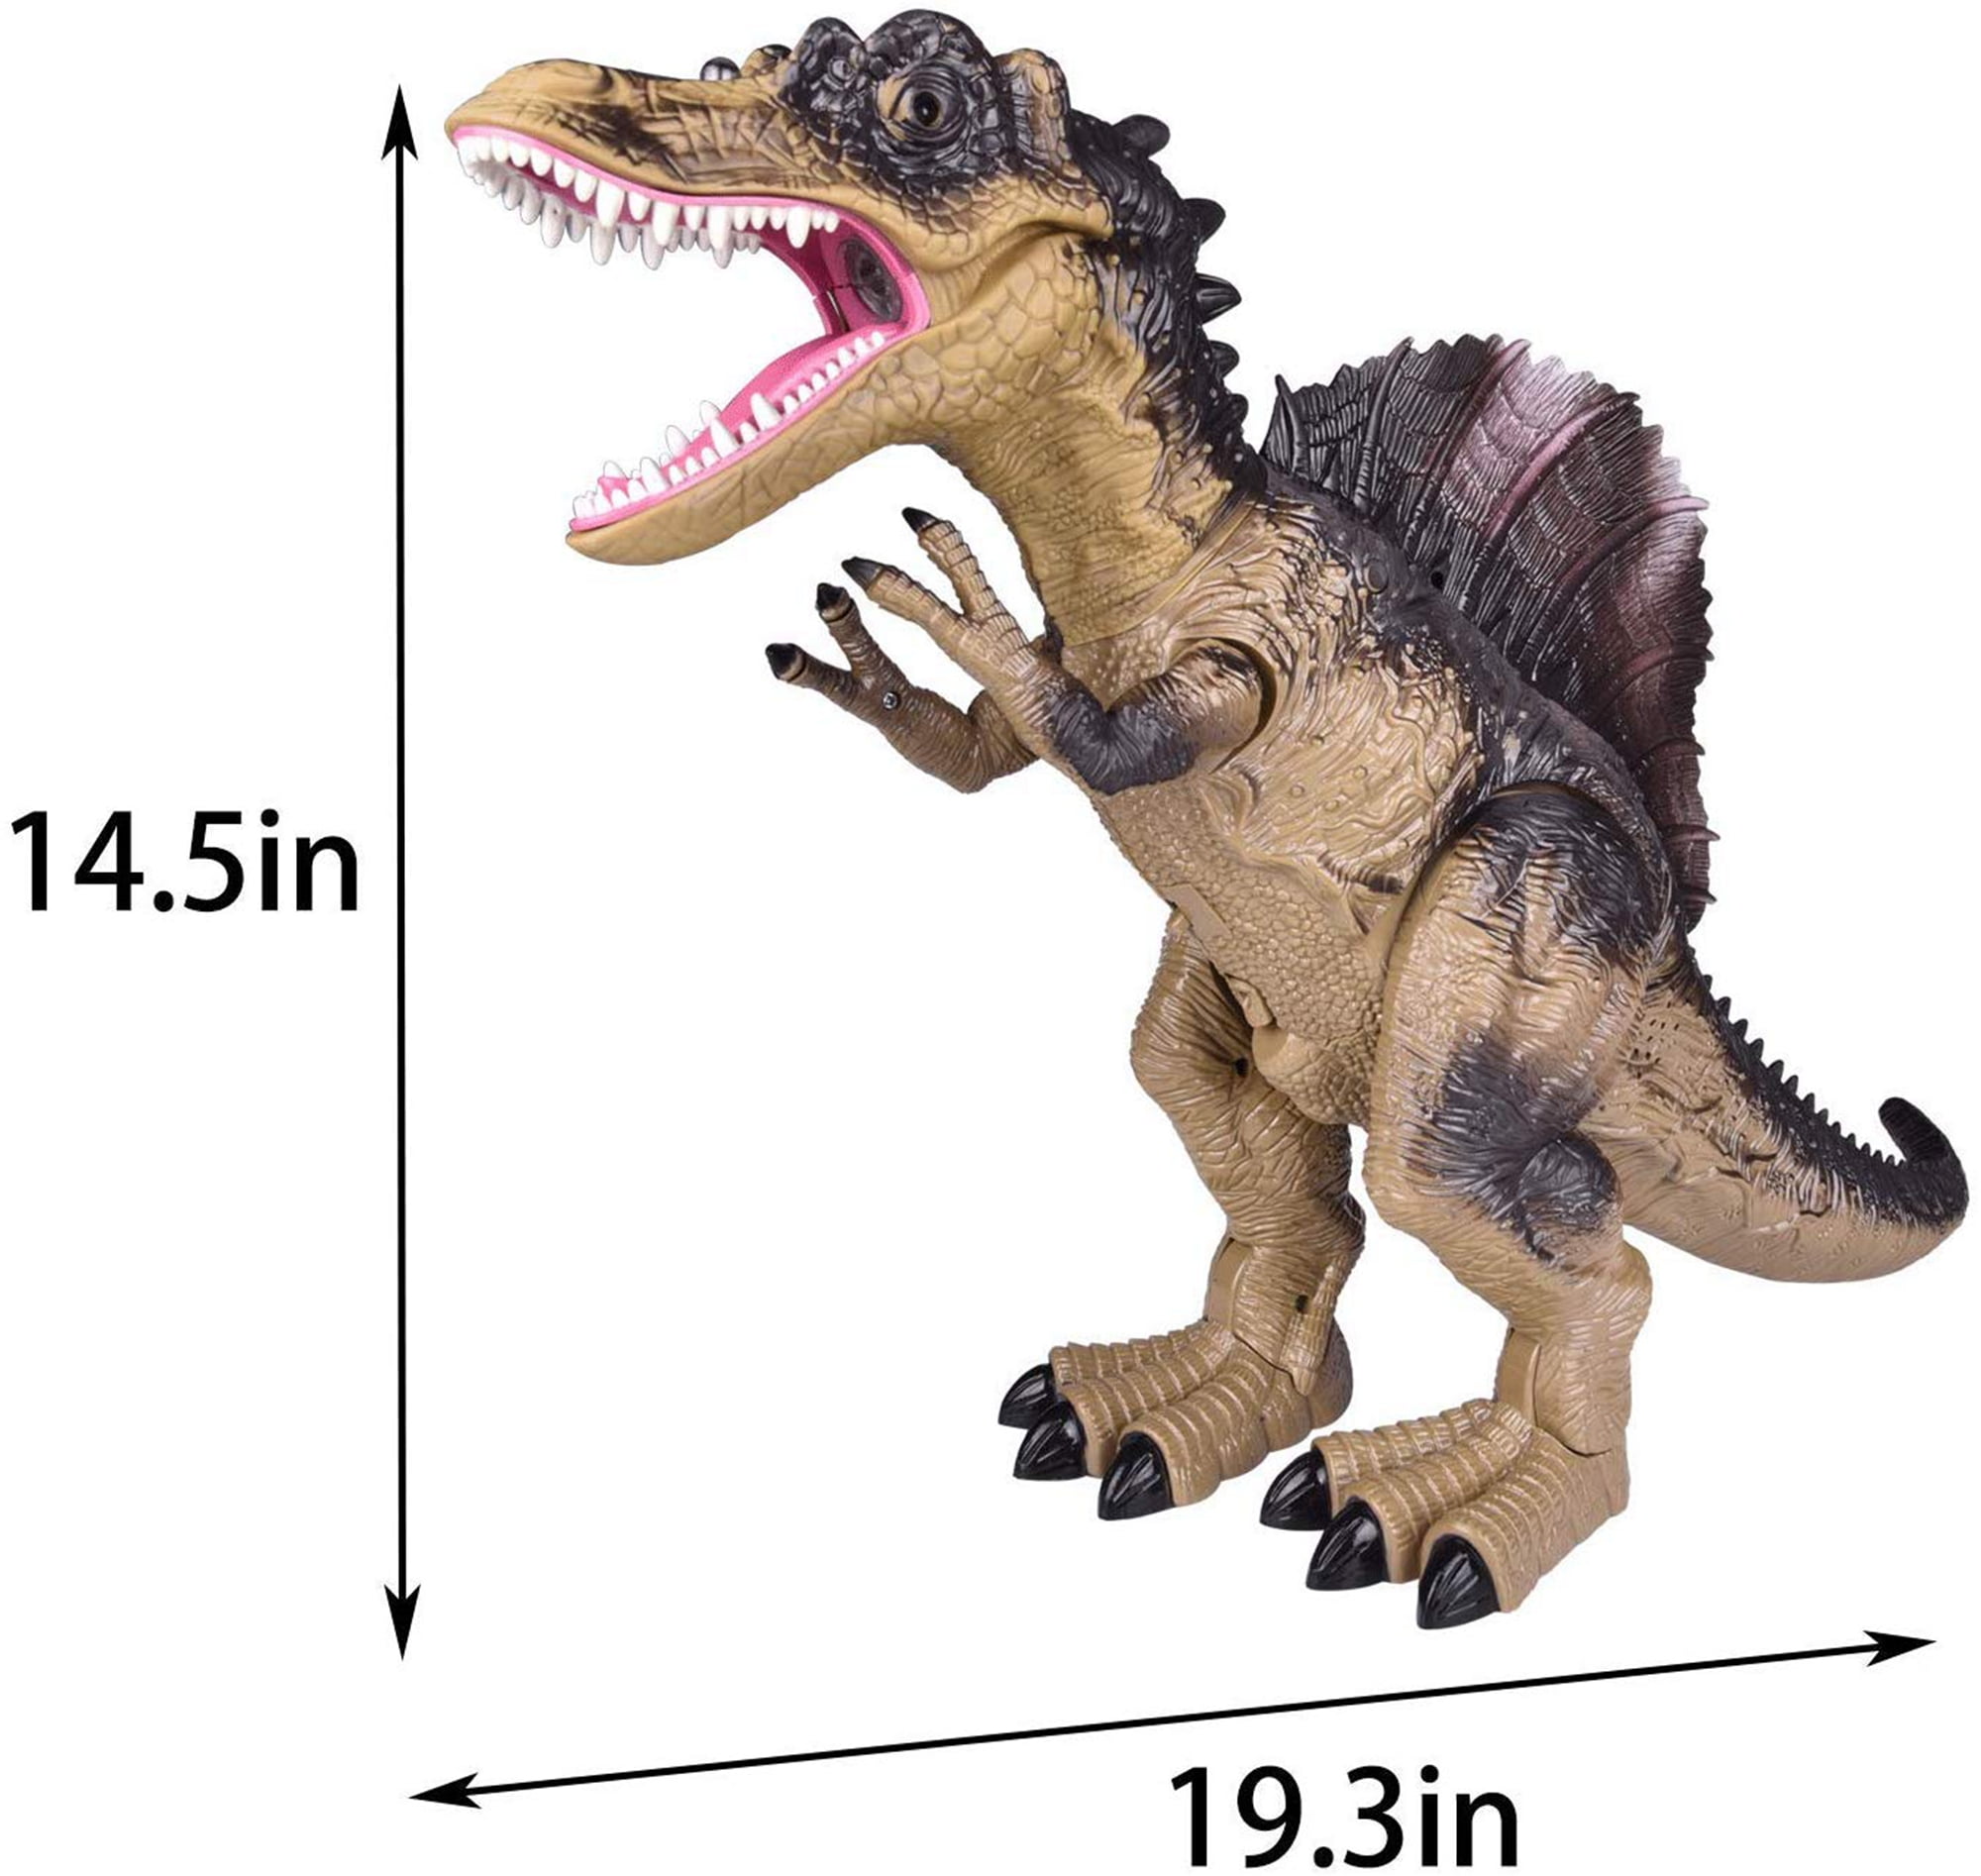 TEMI 2 Pack of Walking Dinosaur Toys Spraying Mist and Colorful Projection – Dinosaur Figures for Preschool Kids Laying Eggs Simulation Electric Tyrannosaurus & Carnotaurus with Realistic Roars 